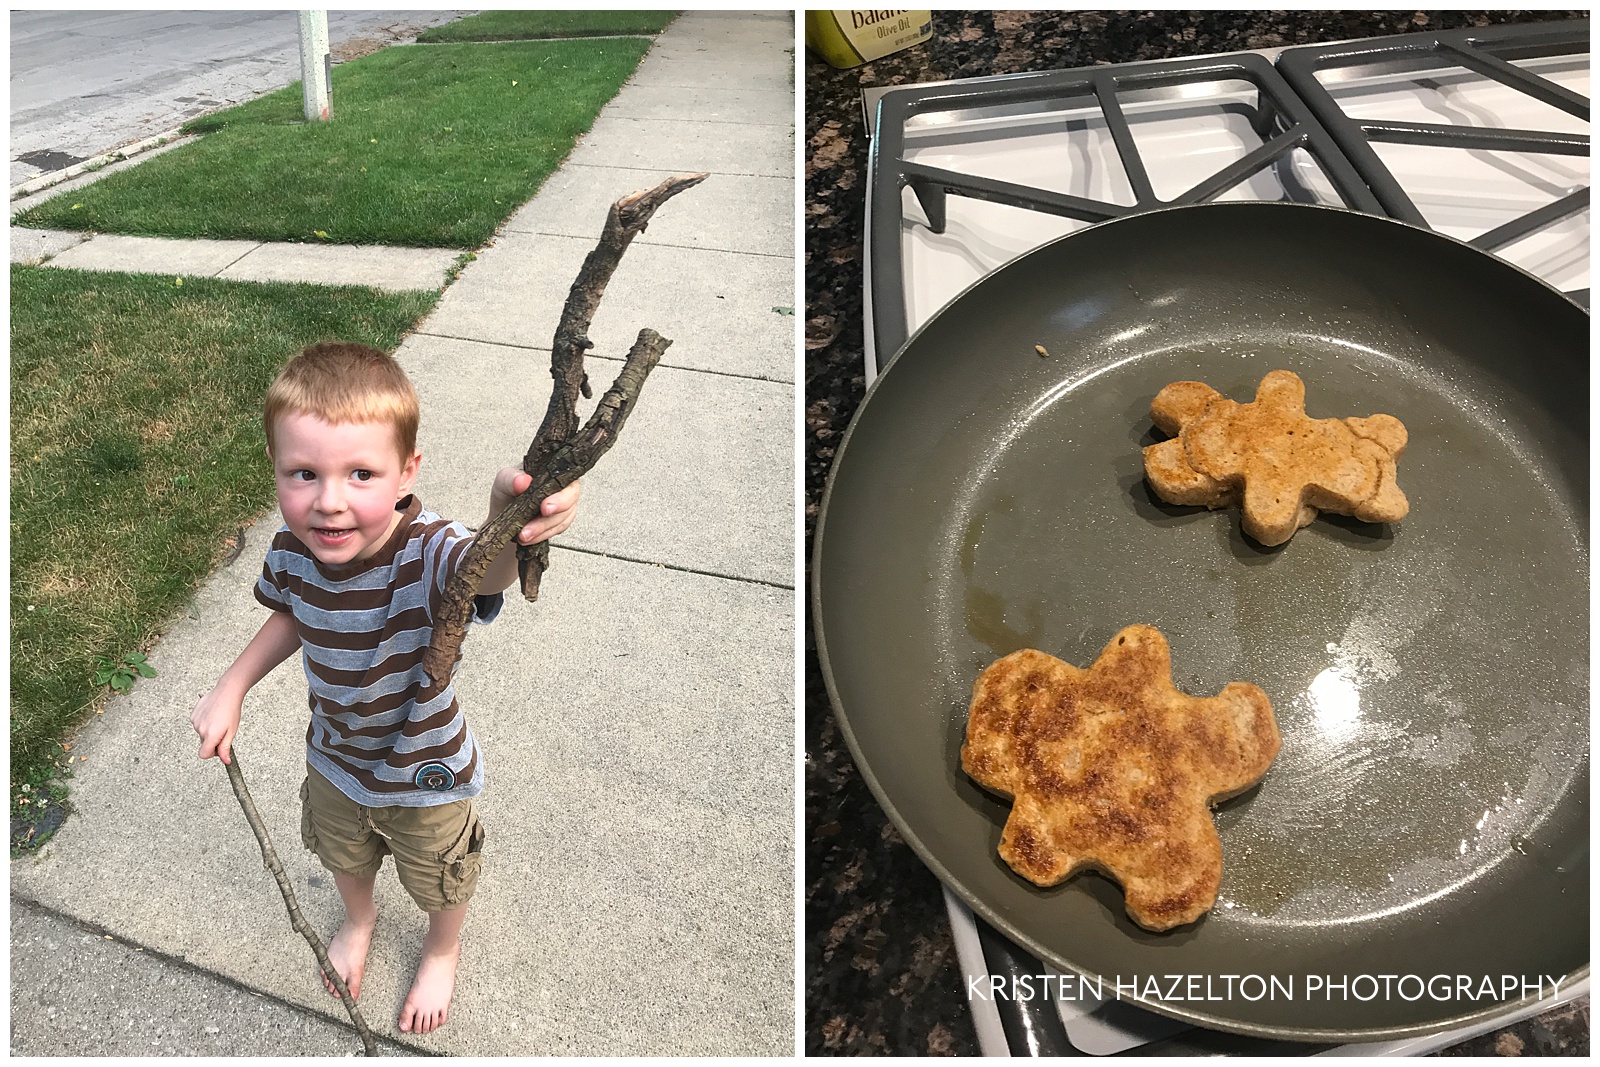 Excited toddler with three big sticks and gingerbread man-shaped crumpets frying in a skillet